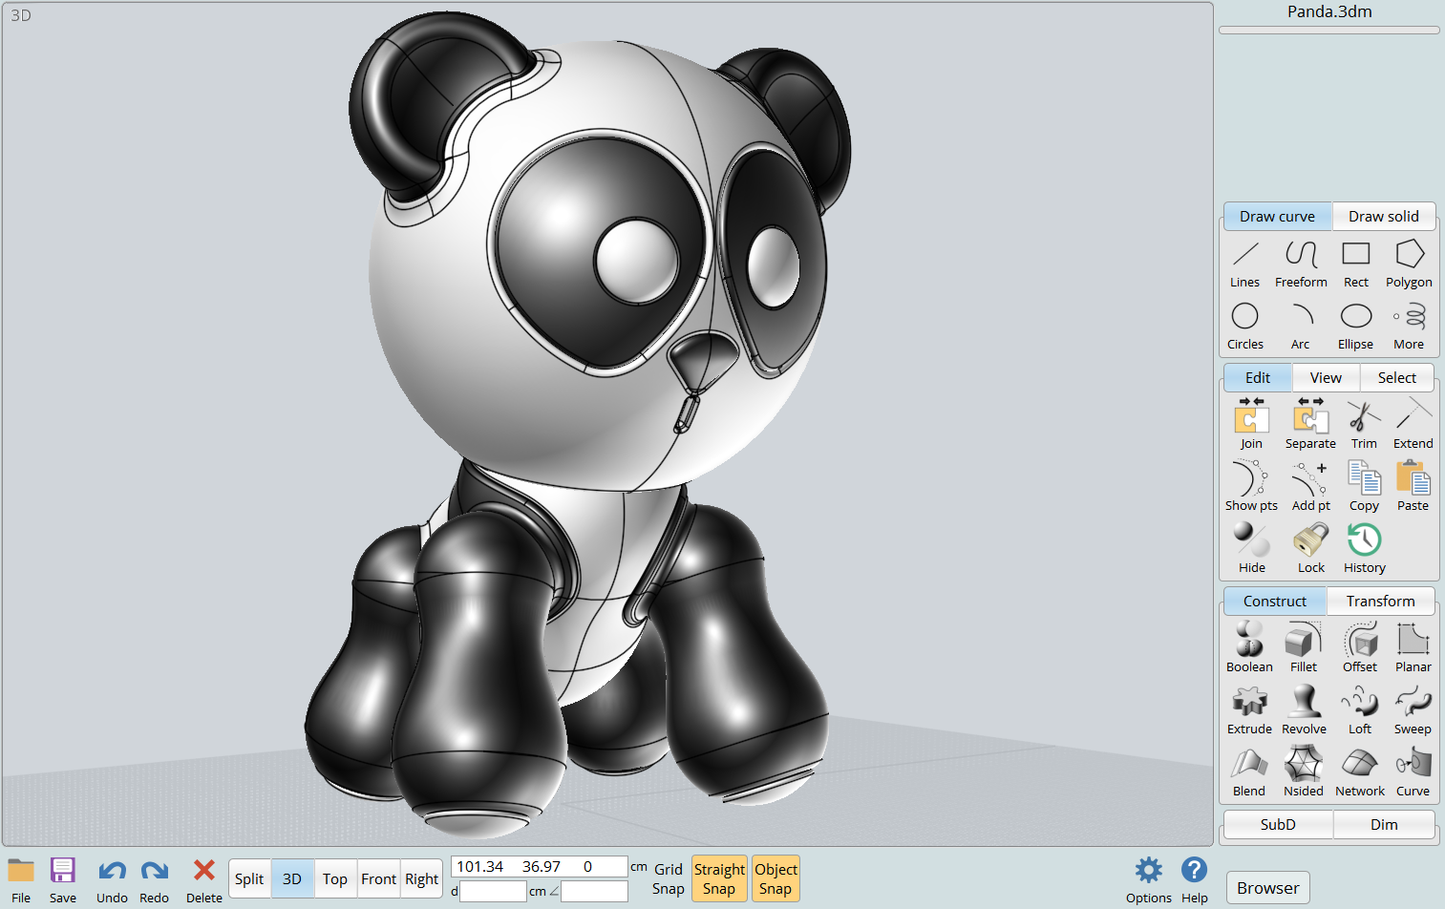 Moment of Inspiration v4 - Creativity with Intuitive CAD